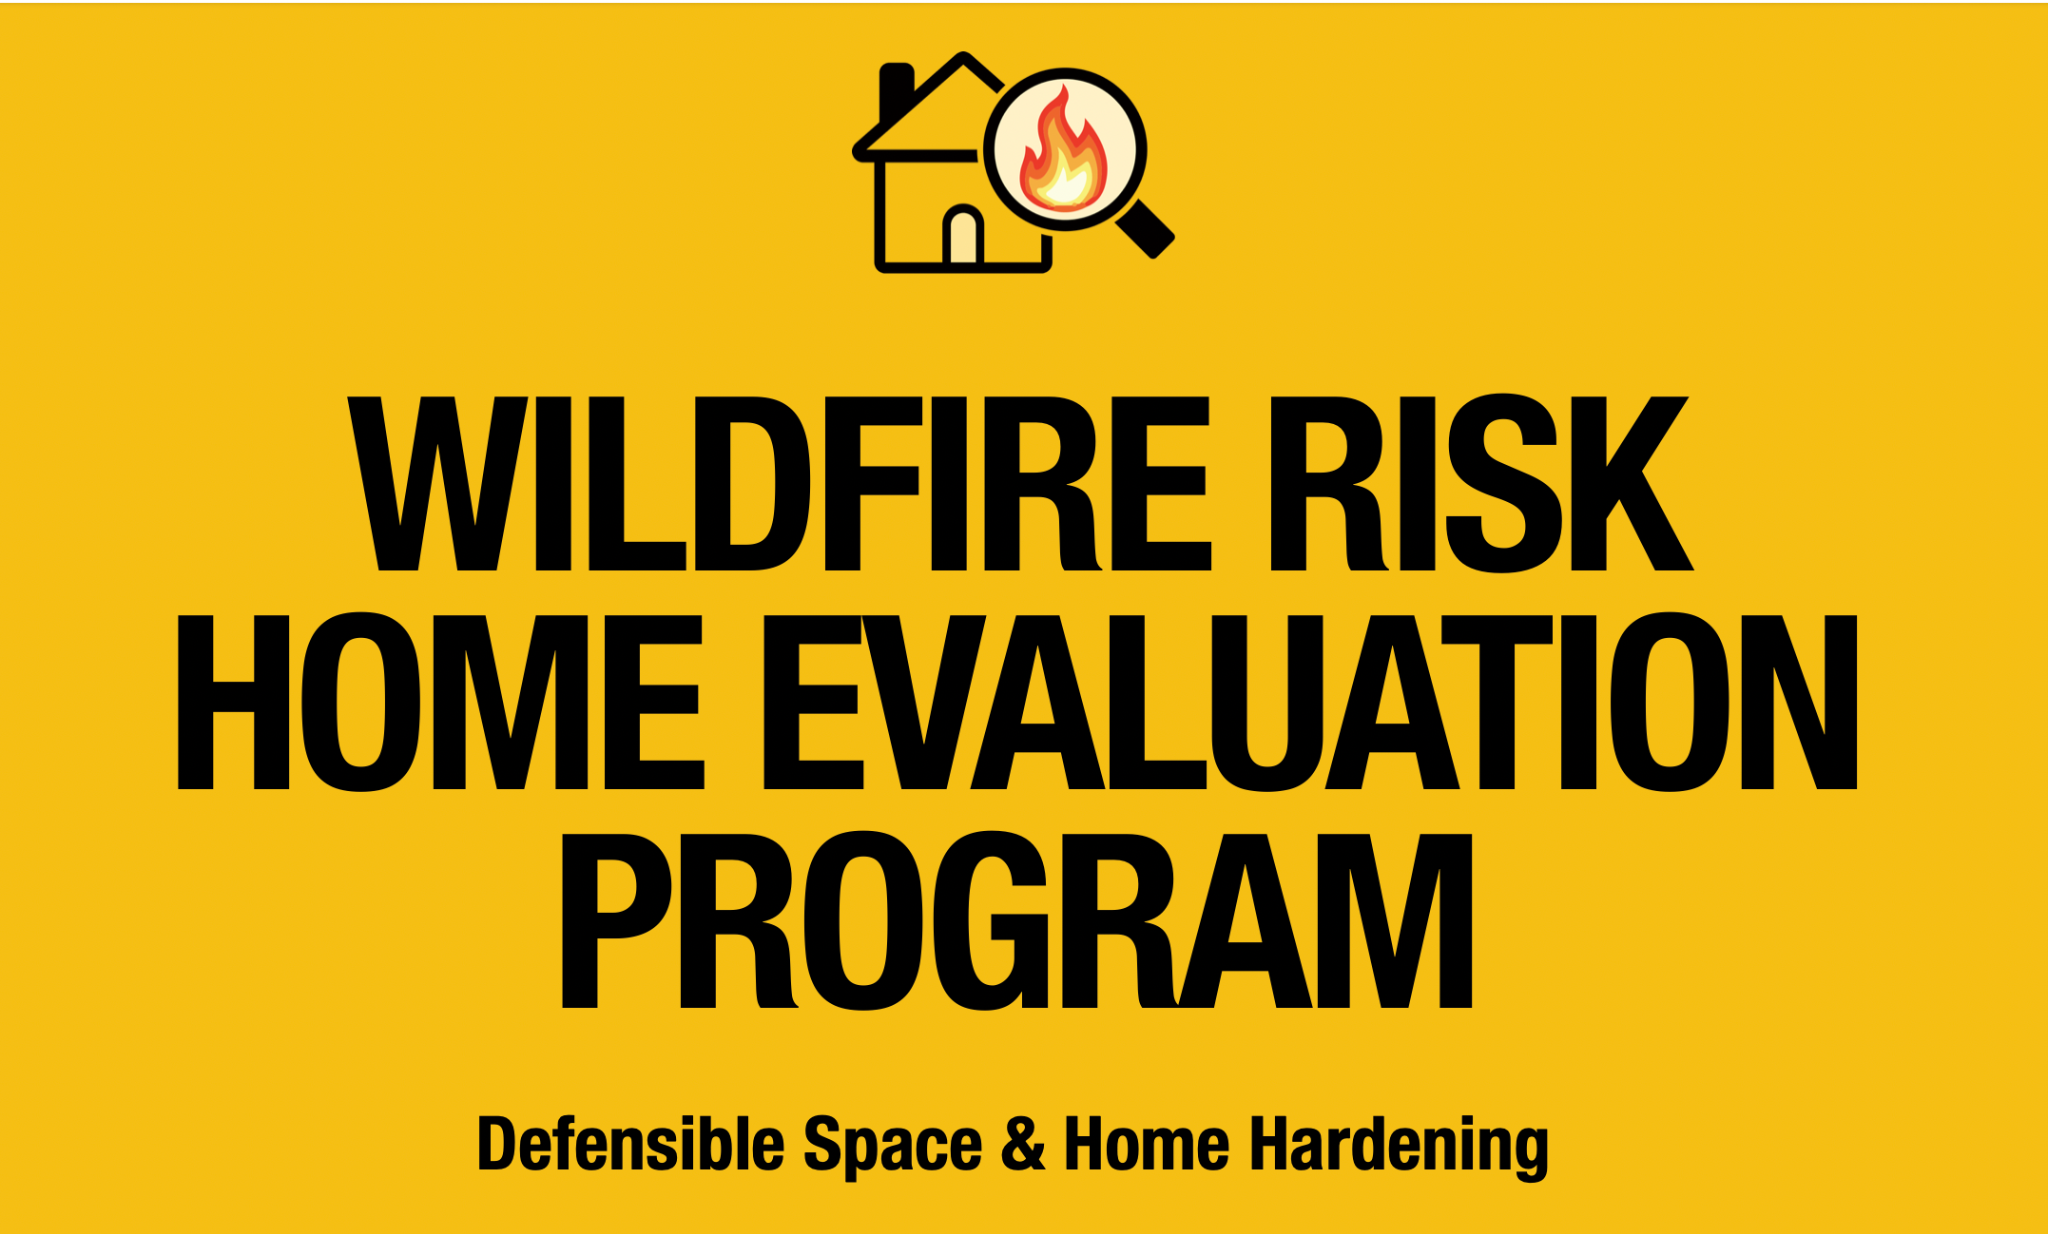 Wildfire Risk Home Evaluation